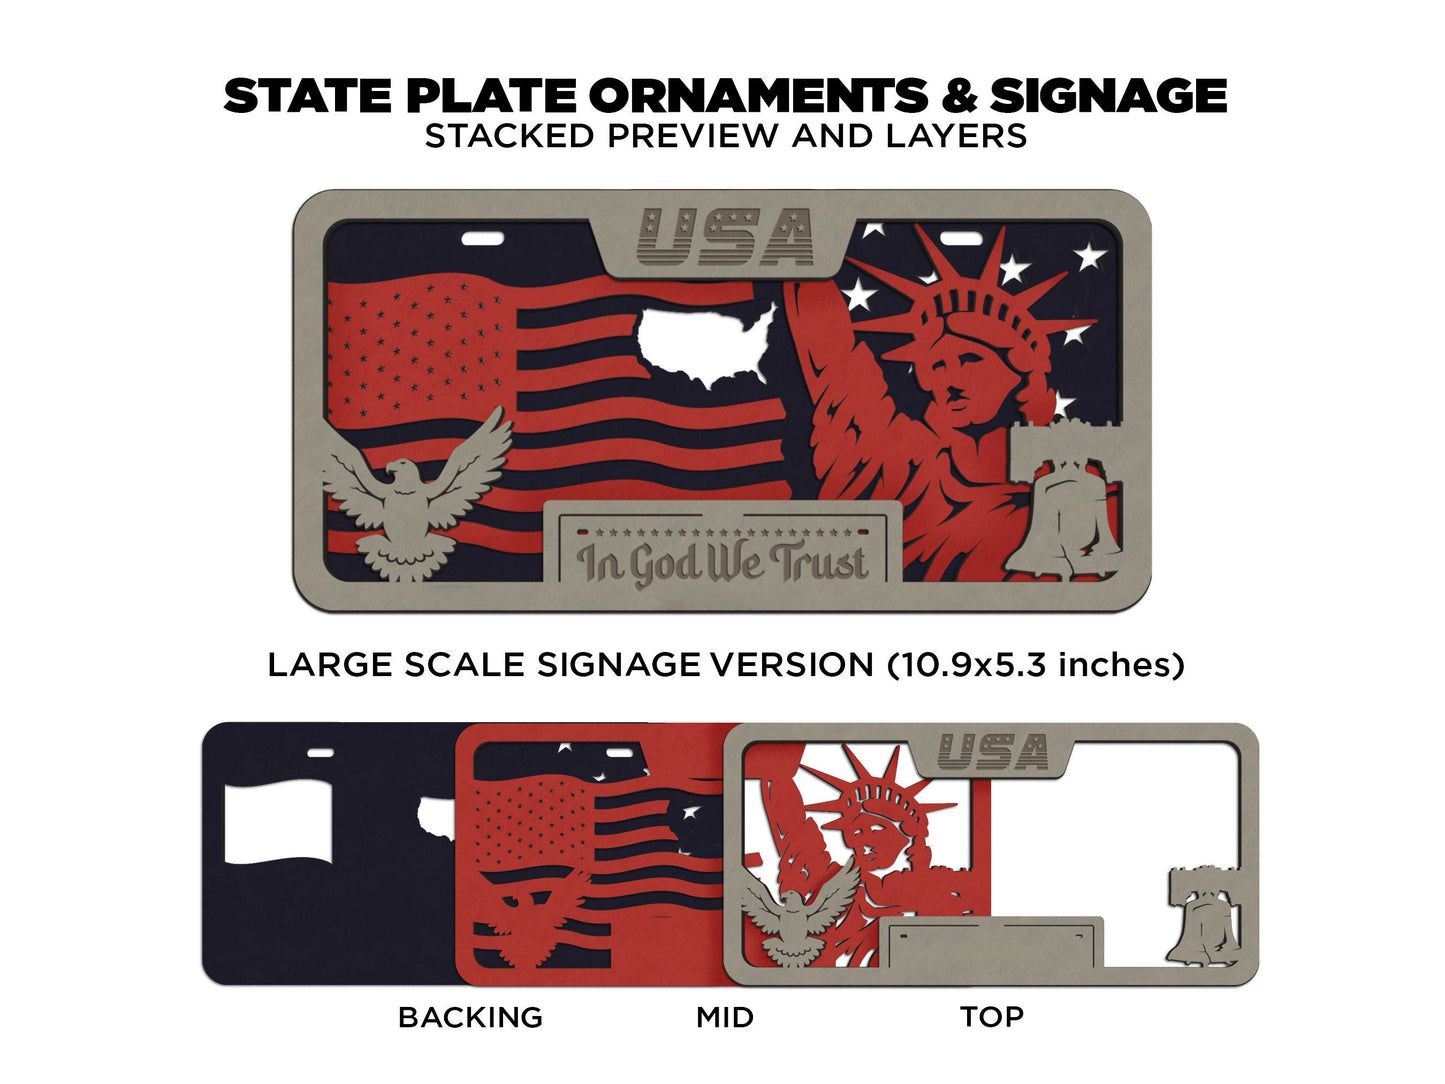 Nebraska State Plate Ornament and Signage - SVG File Download - Sized for Glowforge - Laser Ready Digital Files